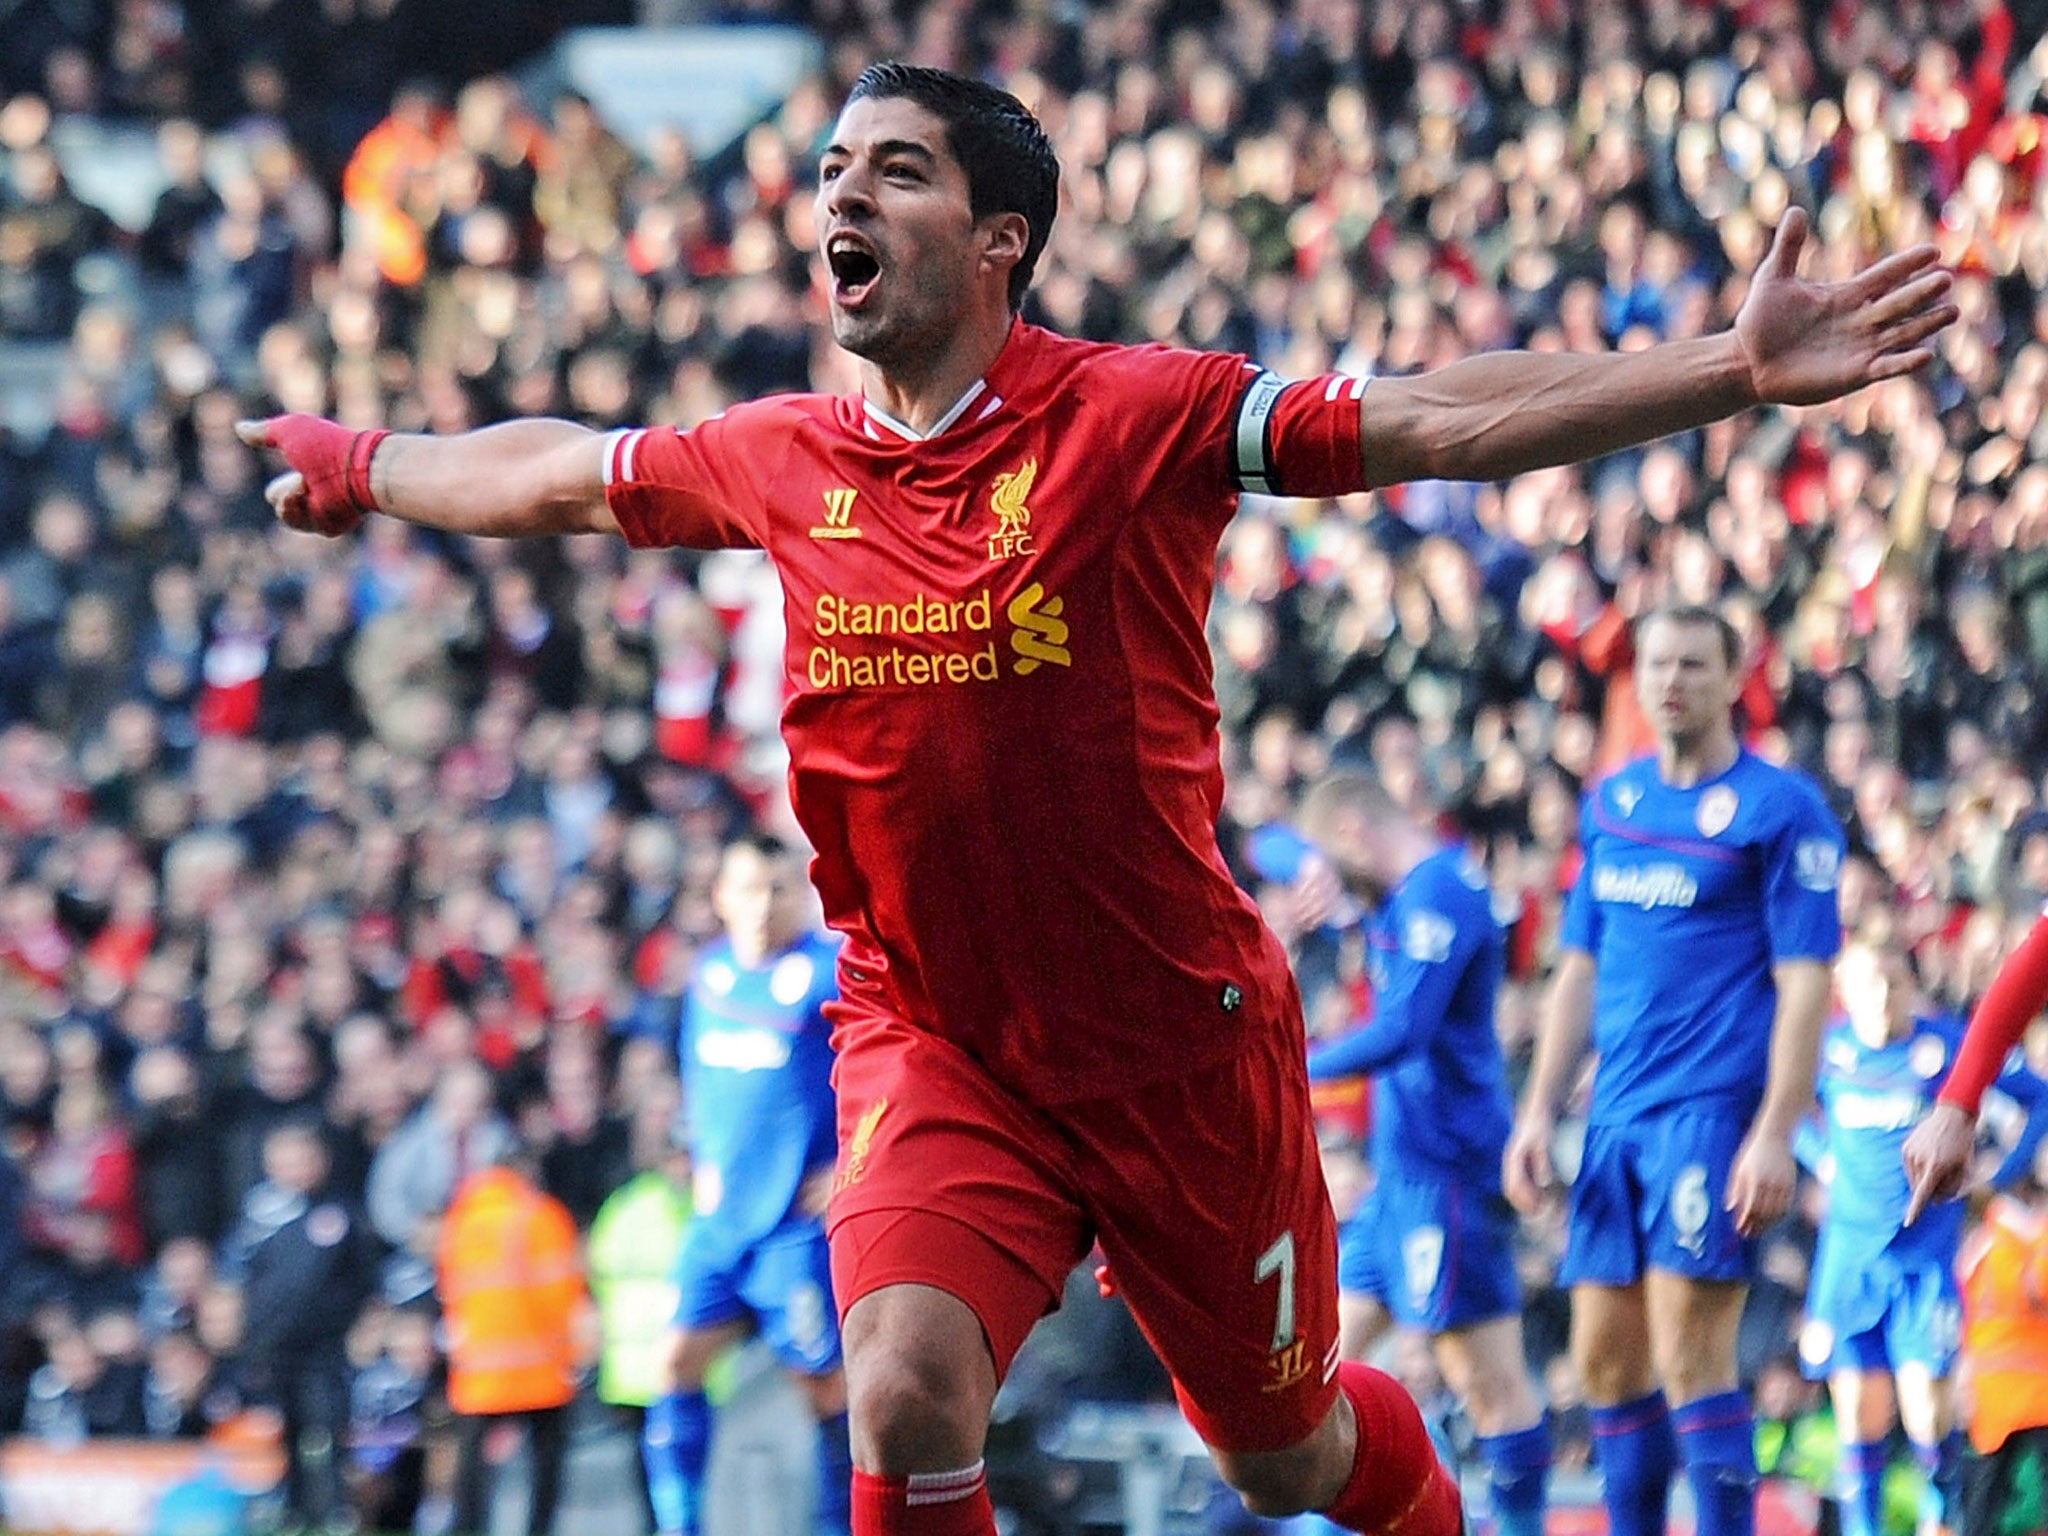 Luis Suarez faces Manchester City today having scored 19 Premier League goals in just 12 games for Liverpool this season